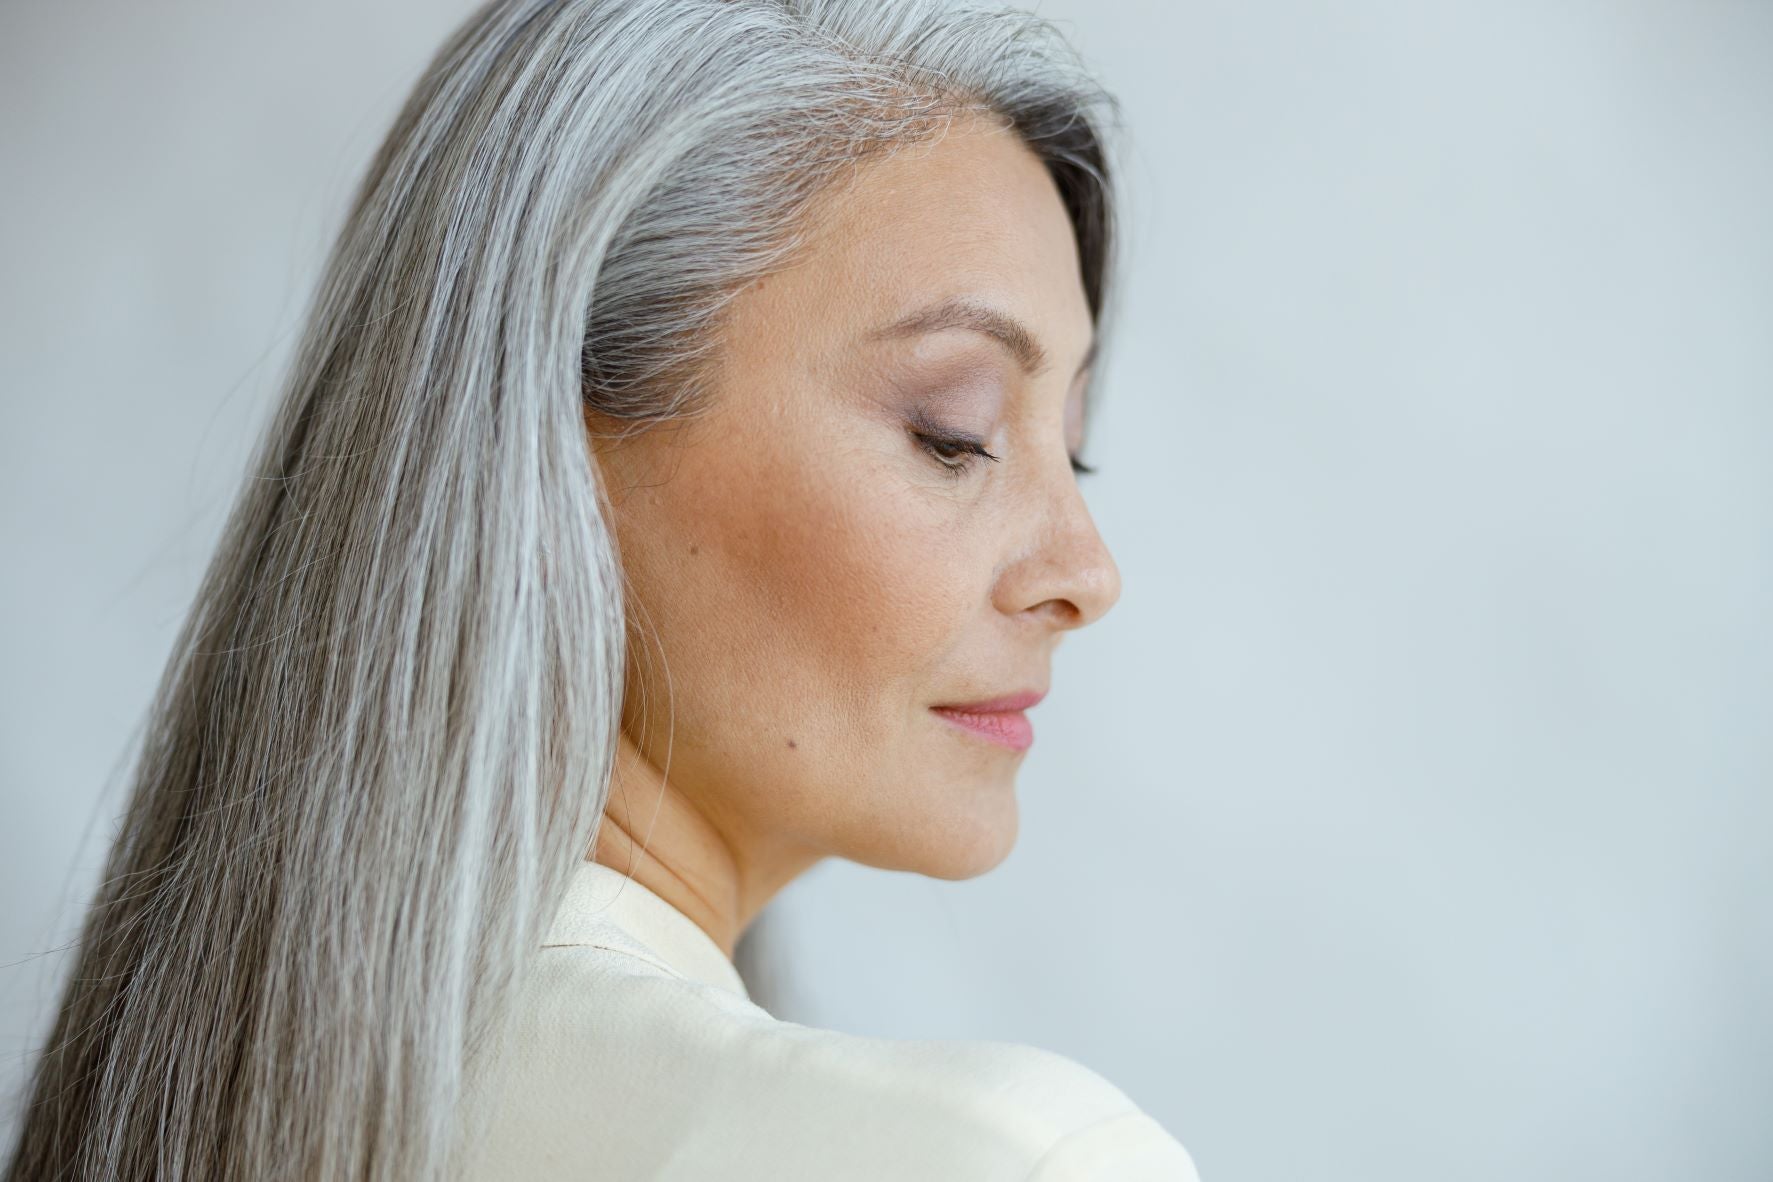 Grey Hair - All you need to know!